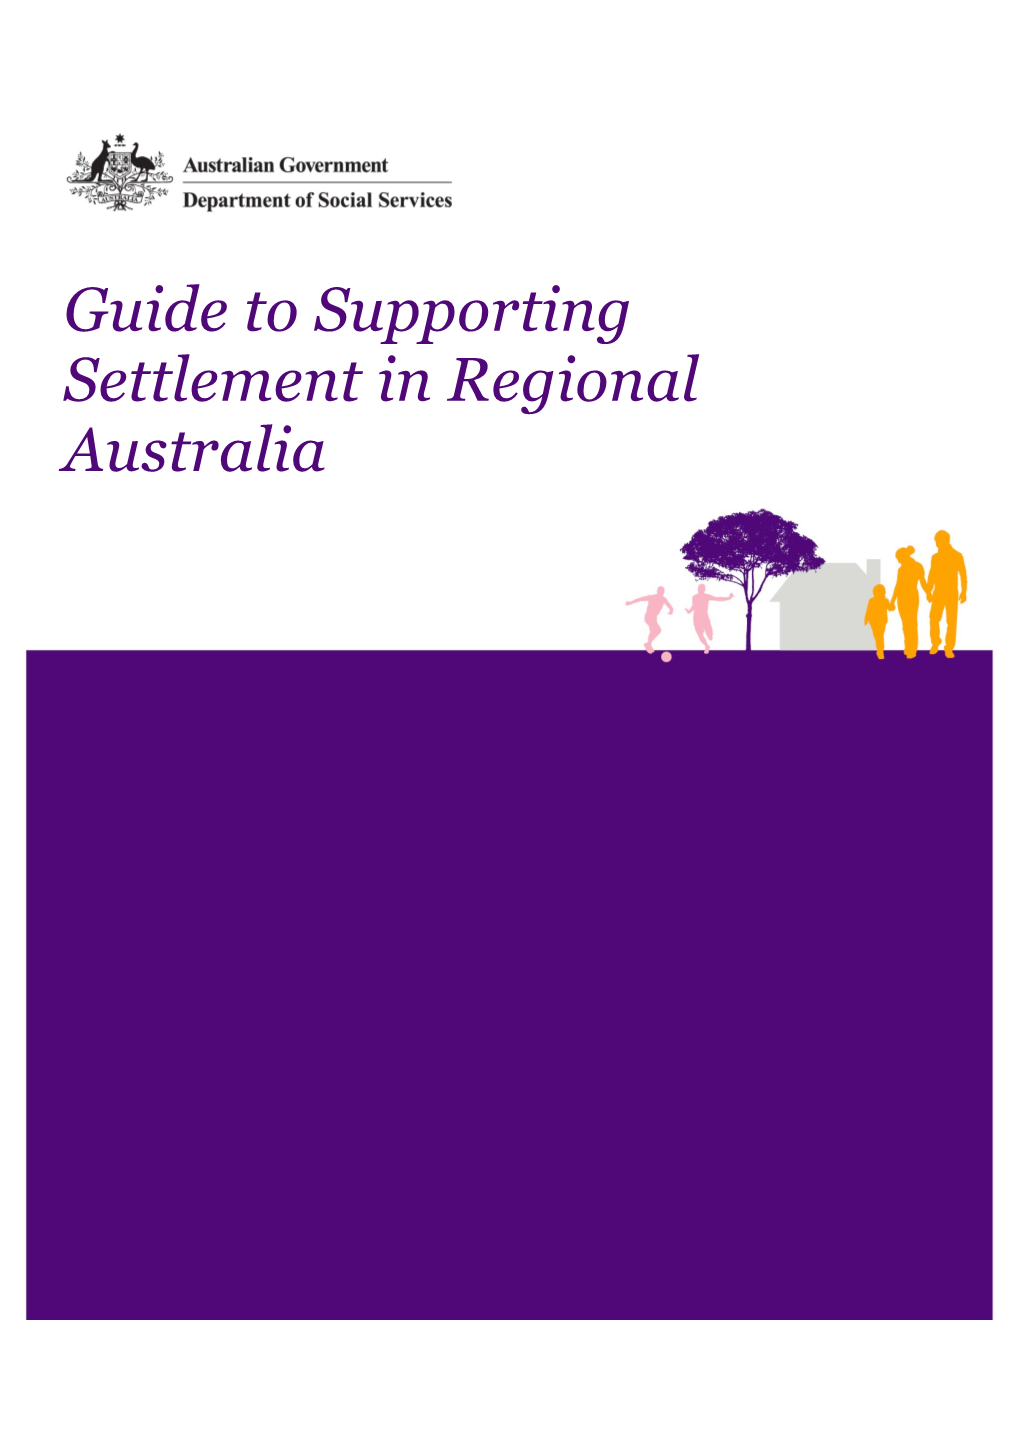 Guide to Supporting Settlement in Regional Australia